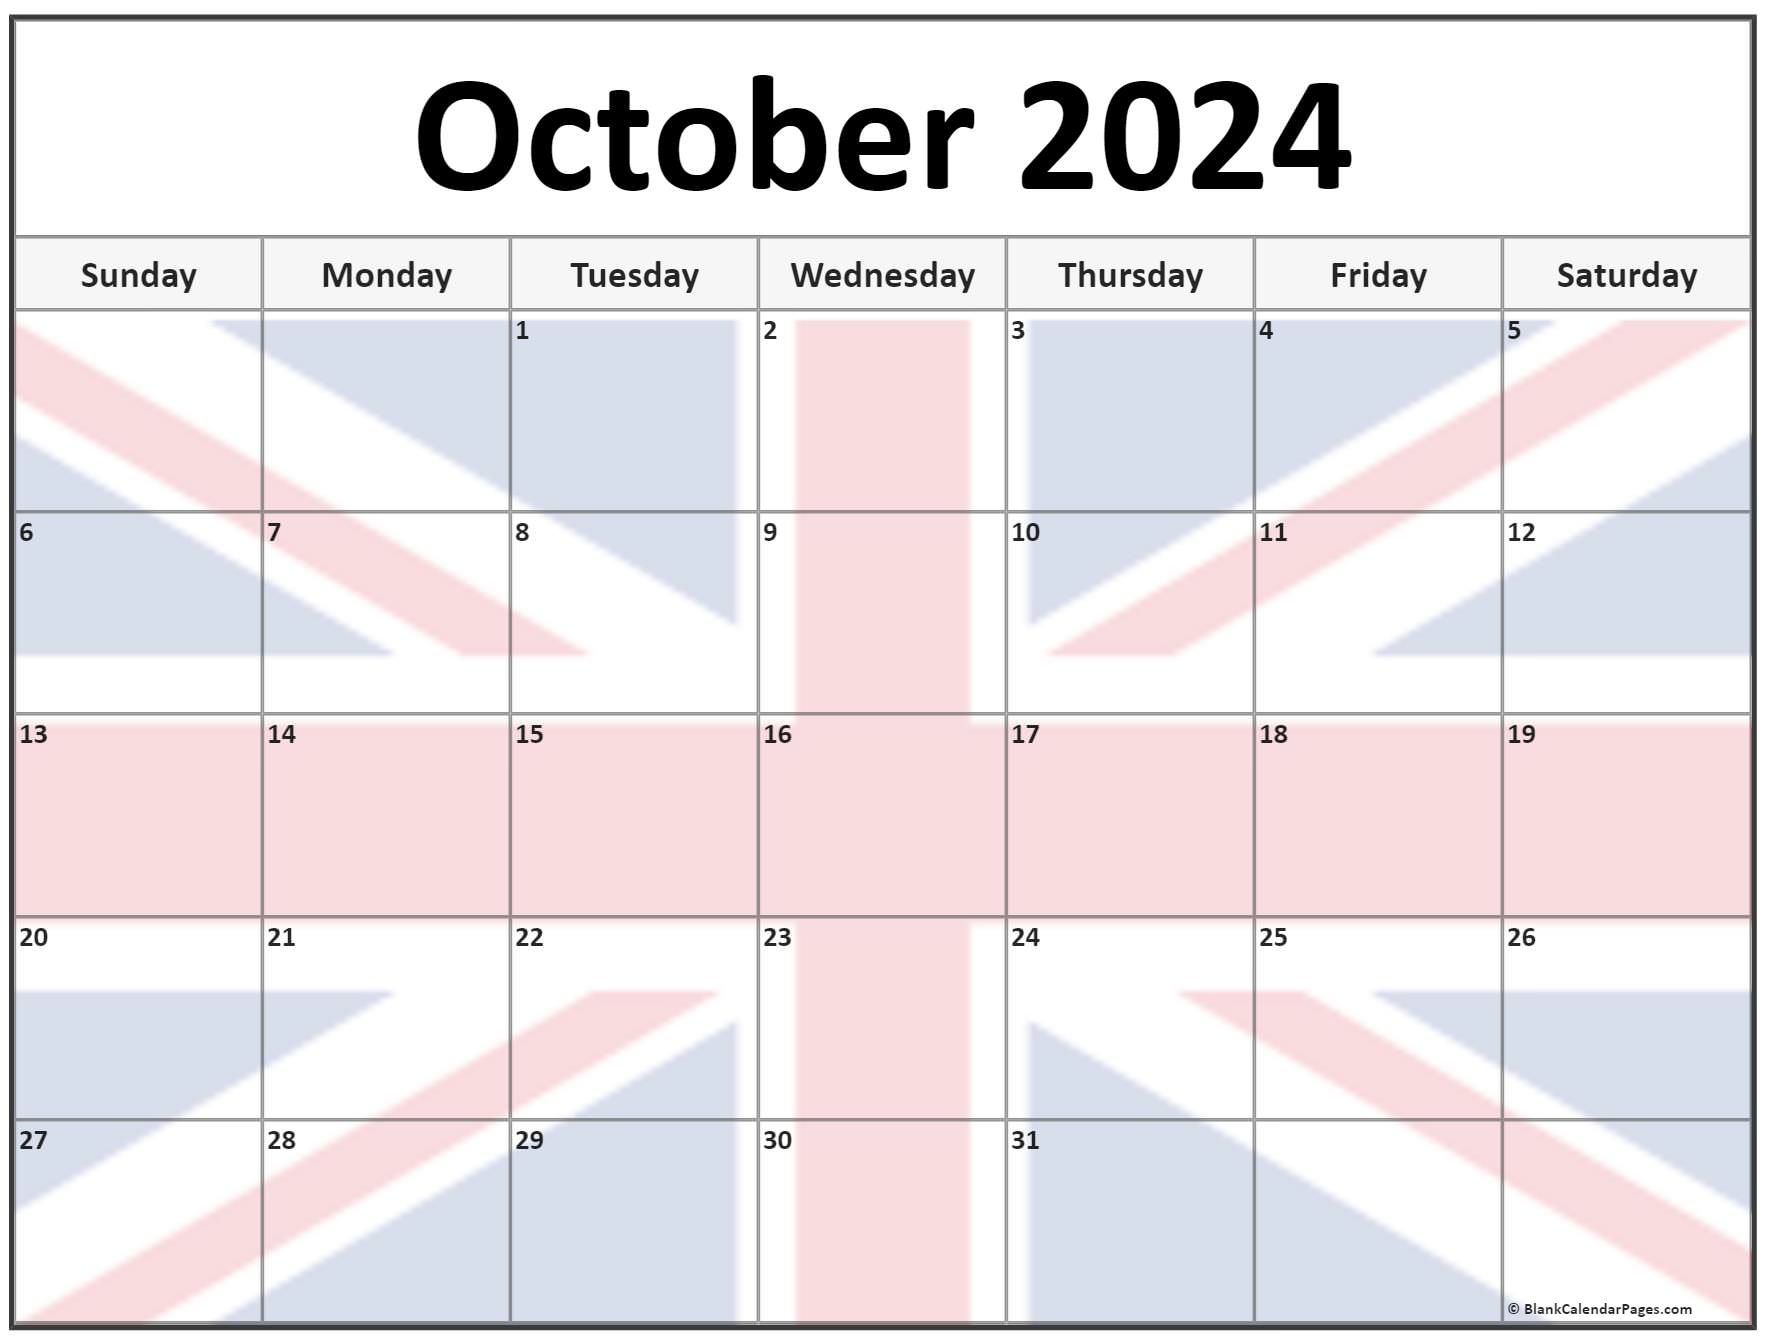 Collection of October 2022 photo calendars with image filters.